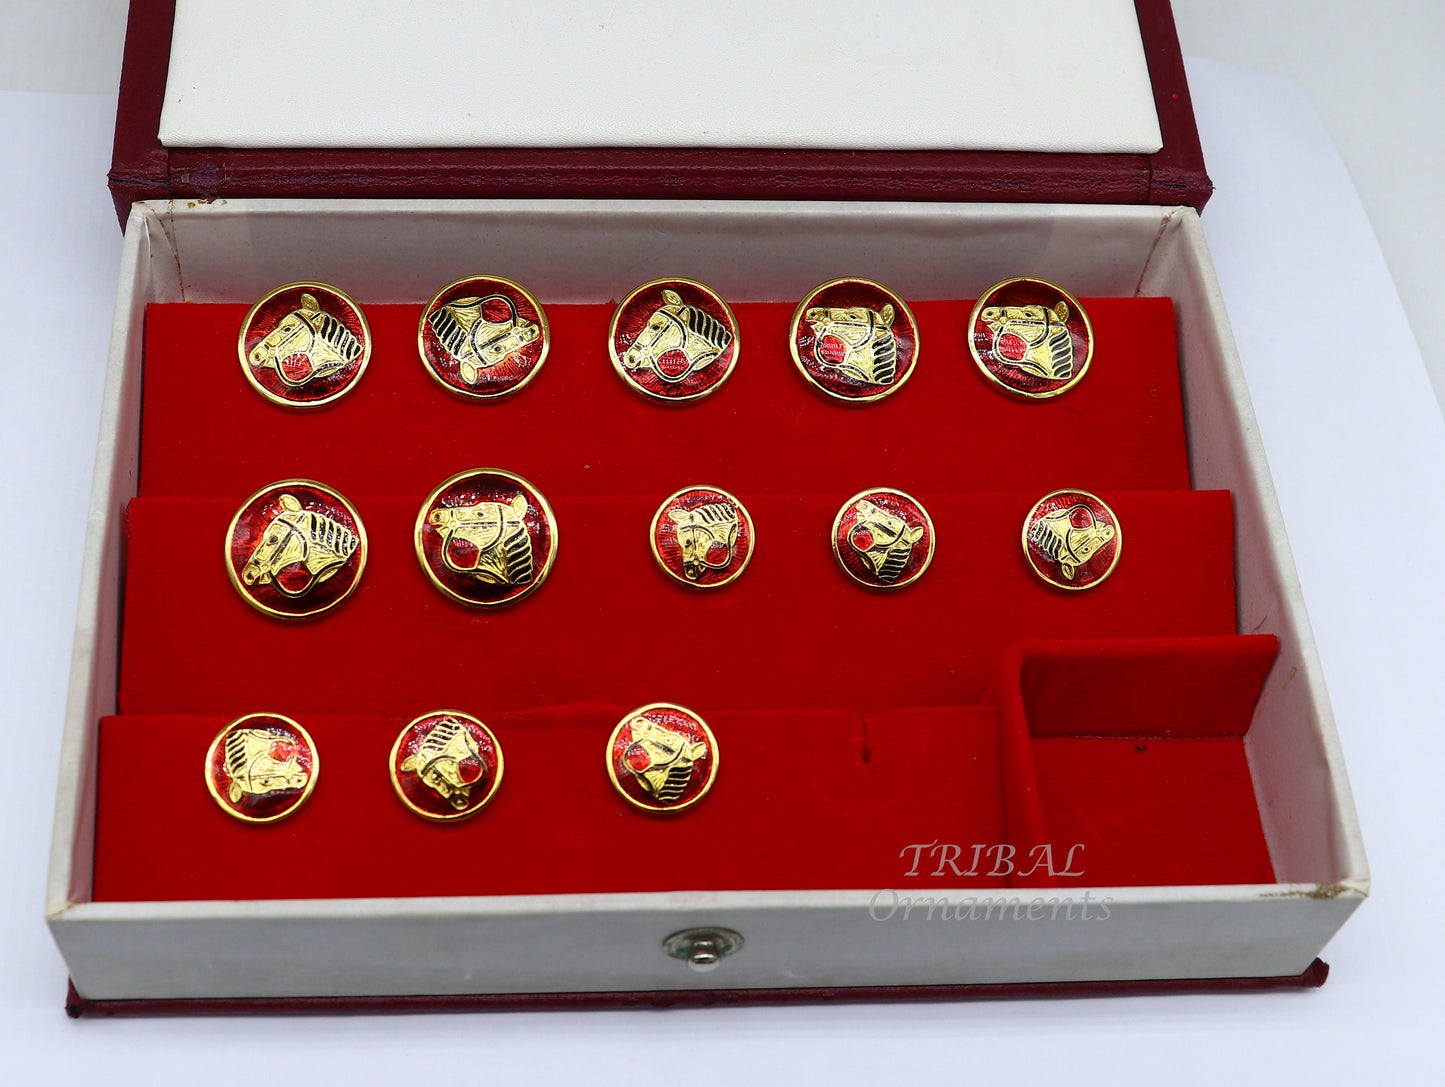 Red enamel horse design 925 Sterling silver handcrafted buttons set of 13 pc for men's coat or suit, best jewelry for all occasions btn25 - TRIBAL ORNAMENTS